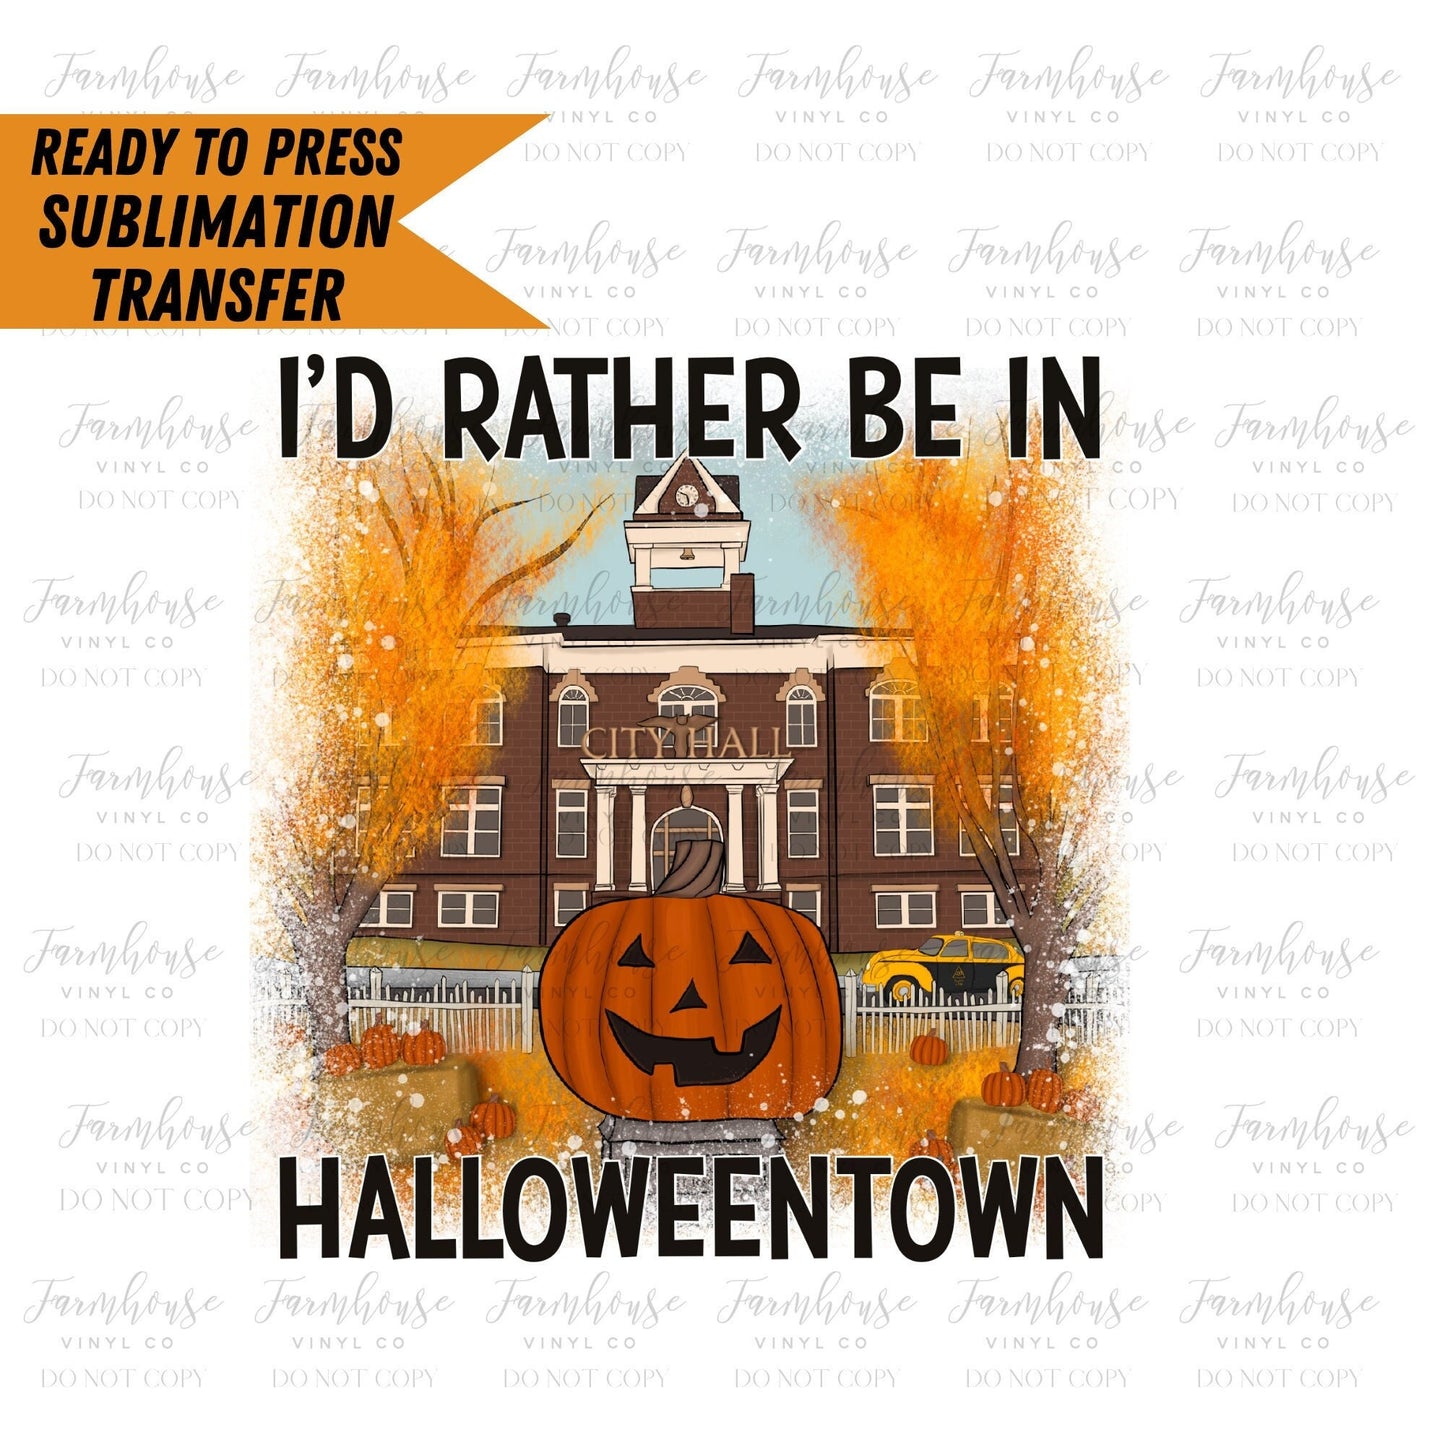 I'd Rather Be in Halloweentown, Ready to Press Sublimation Transfer, Sublimation Transfers, Heat Transfer, Halloween Shirt Transfer, Easy